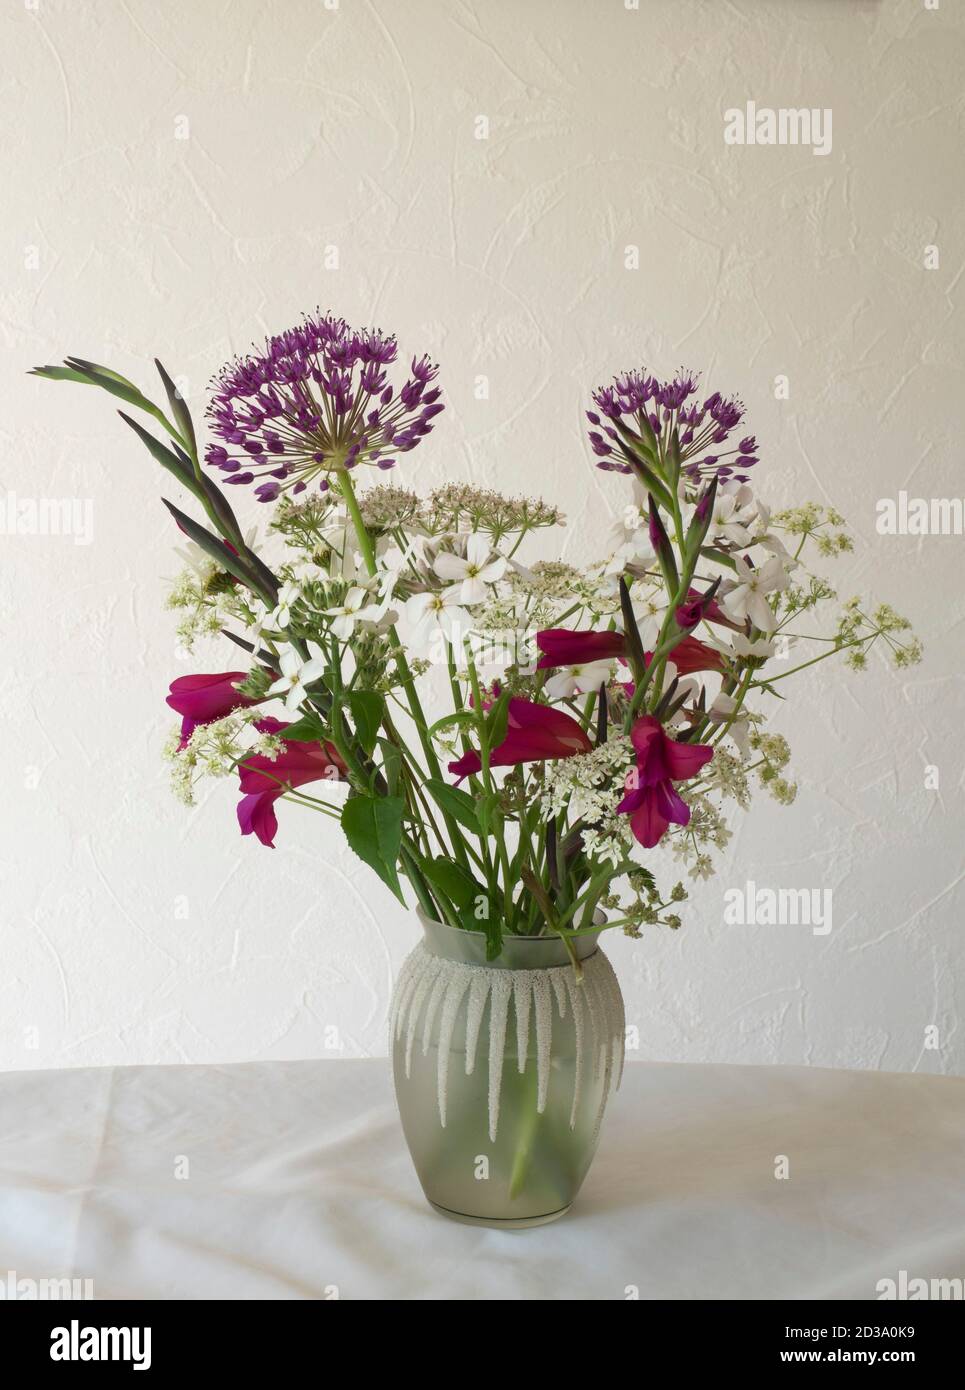 Flower arrangement in patterned glass vase, including Allium, Byzantine Gladiolus and Common Bishop's Weed or Queen Anne's Lace. Stock Photo